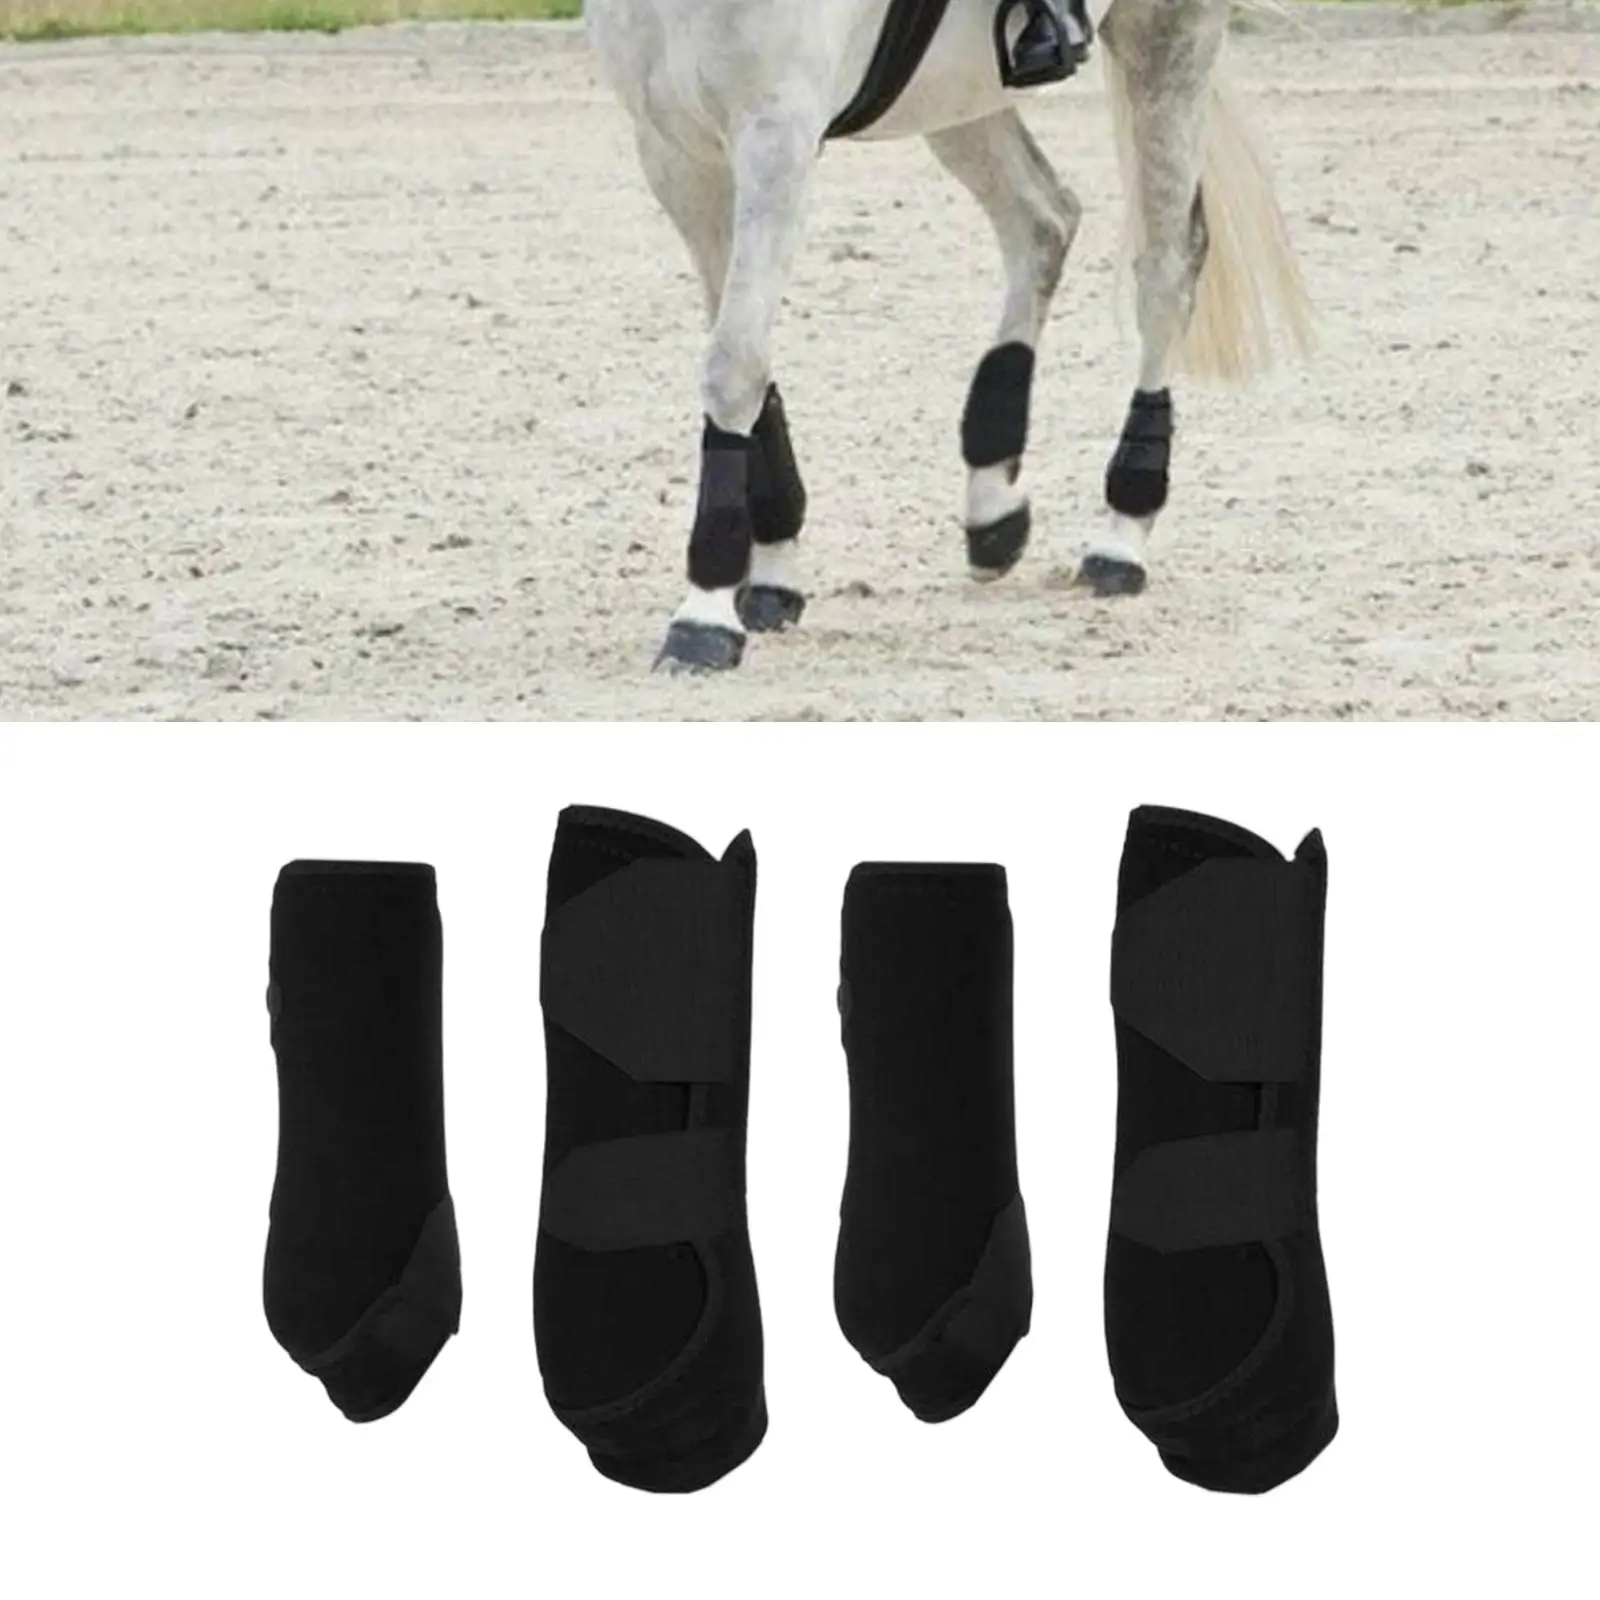 4Pcs Neoprene Horse Boots Leg Wraps Shockproof Tendon Protection Protector Leg Guard for Jumping Training Equestrian Equipment